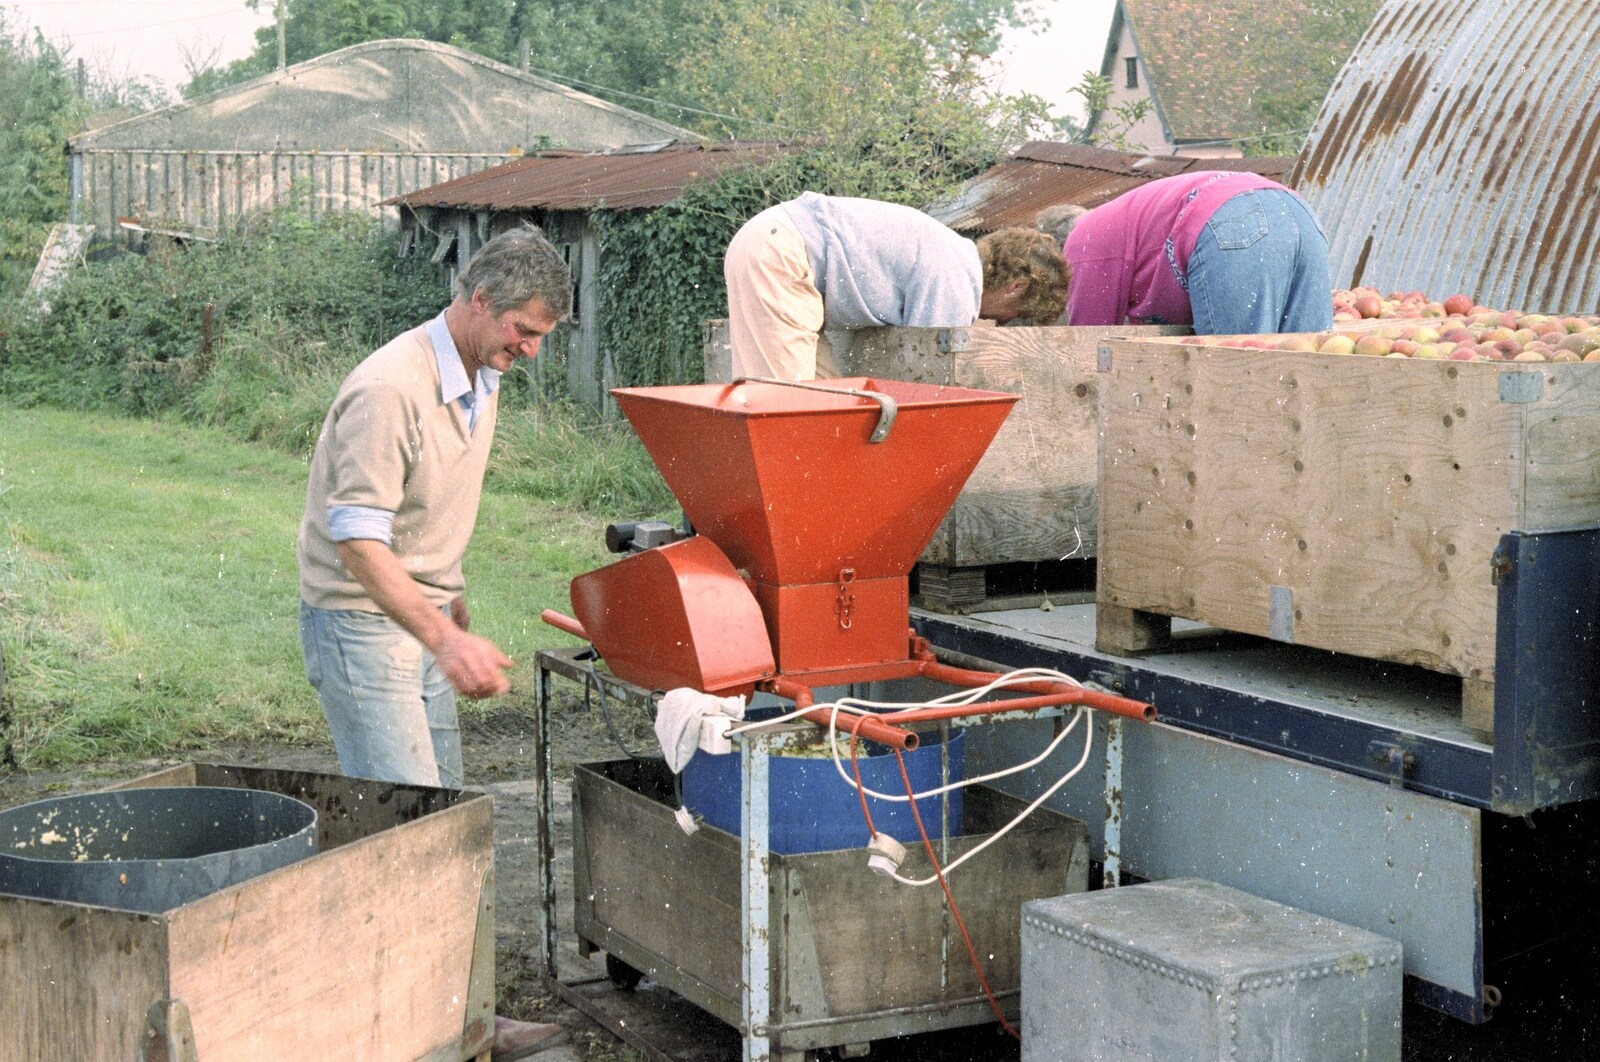 Cider Making (without Rosie), Stuston, Suffolk - 23rd September 1994: Brenda and Linda furtles the last few apples out of a box